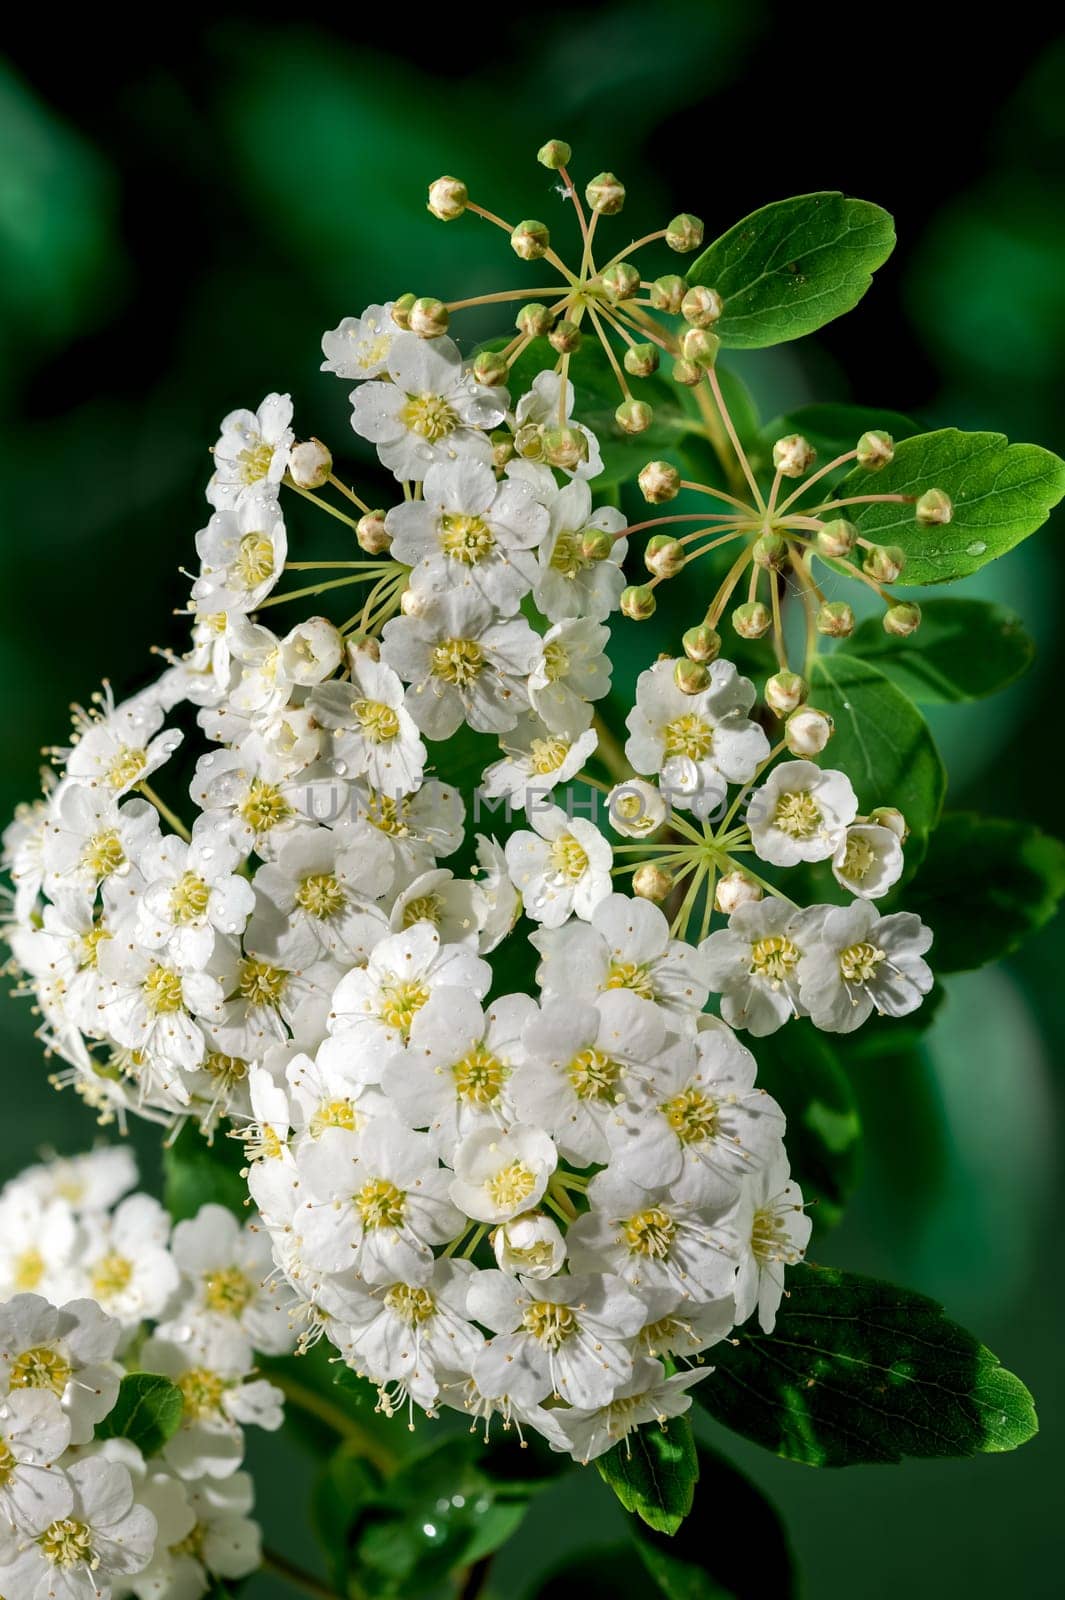 Blooming white spirea flowers on a green background by Multipedia